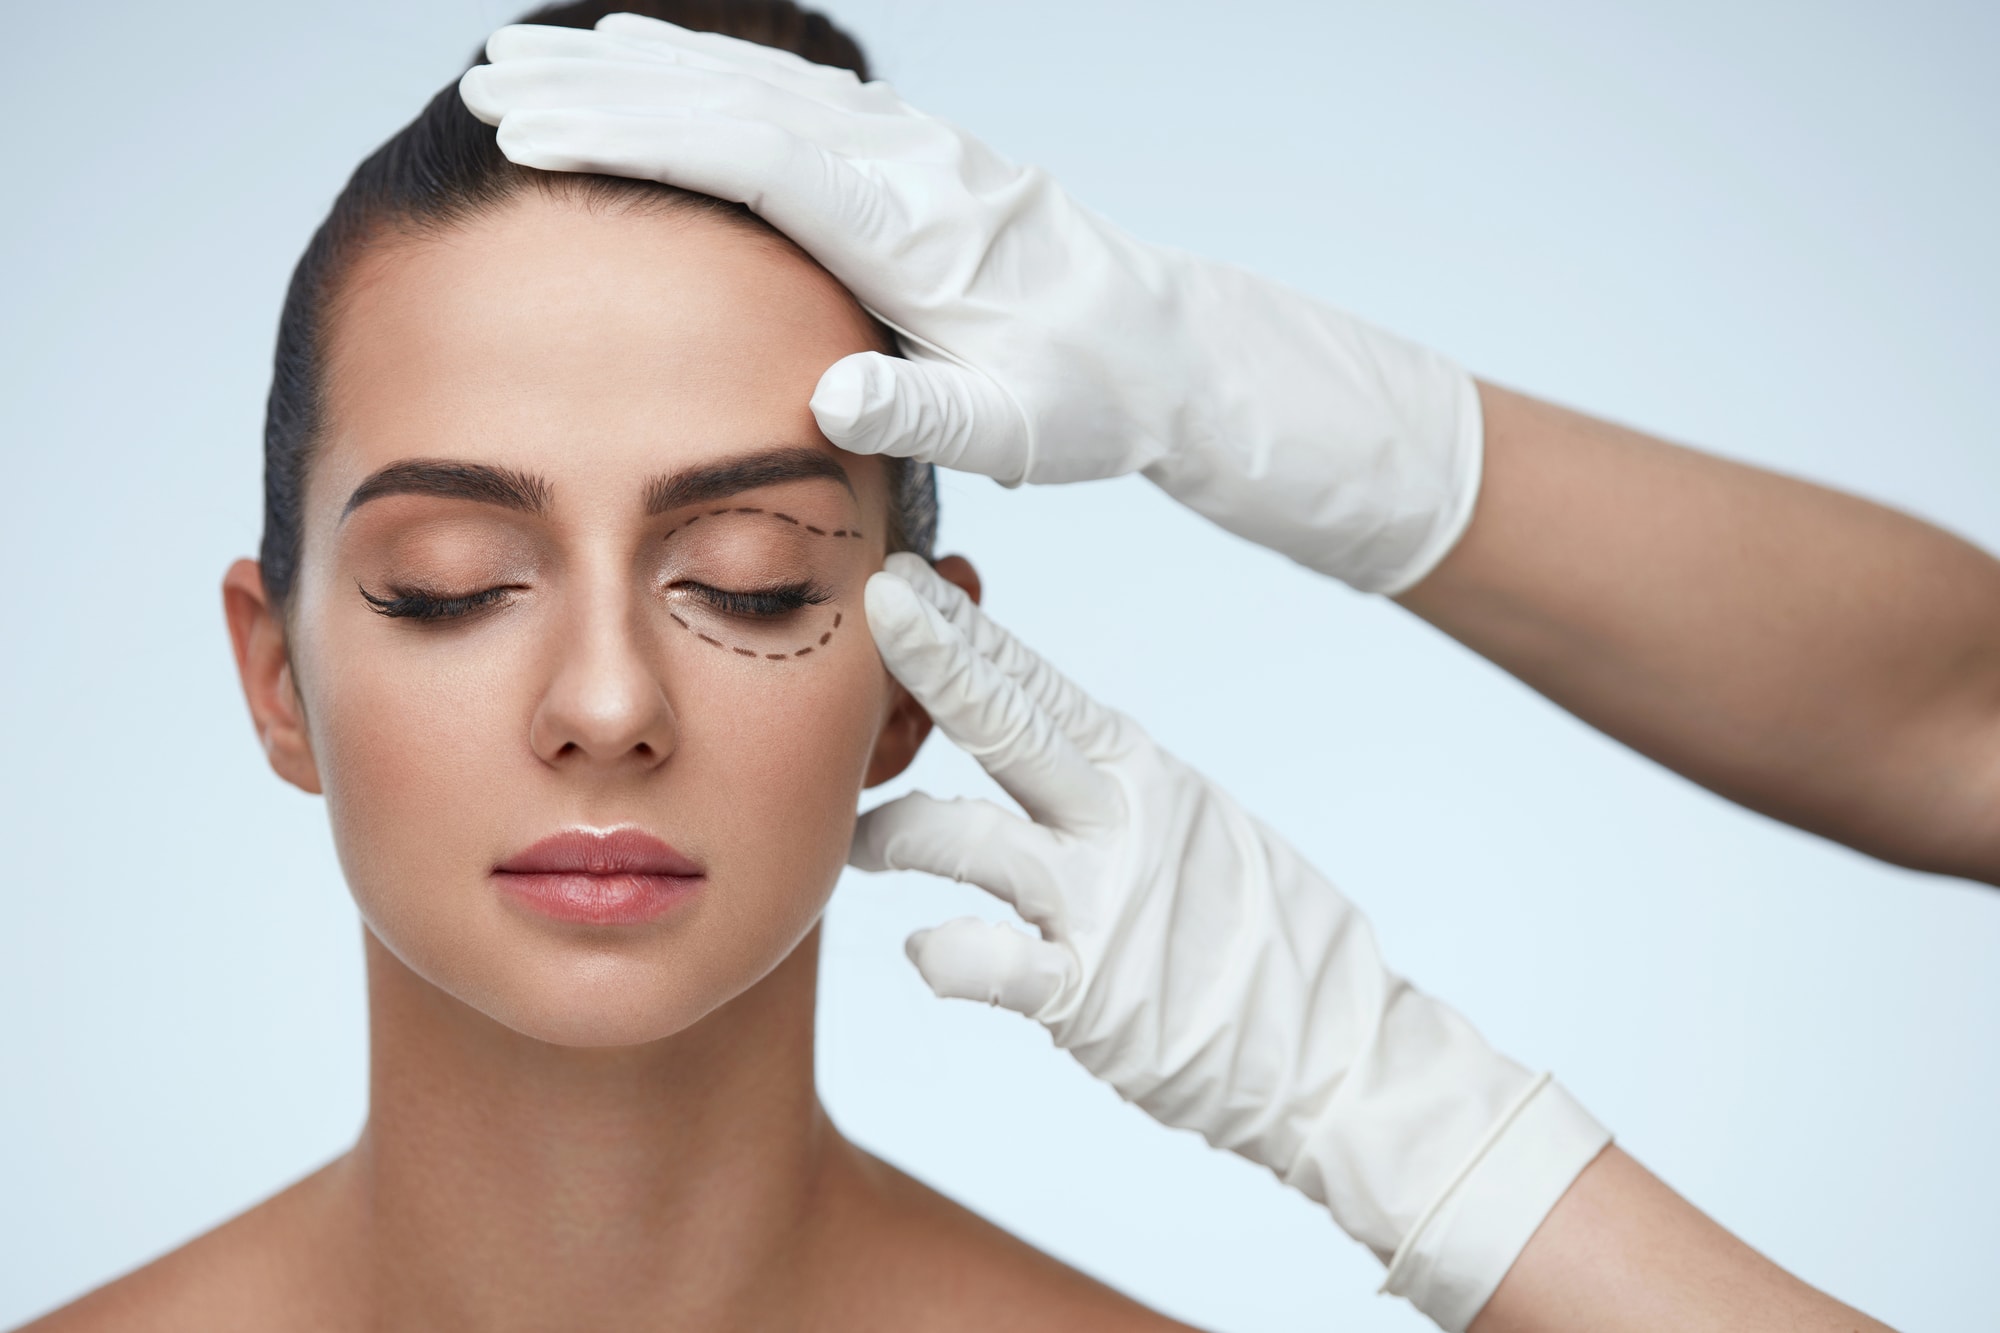 Eye lifts can give a person a youthful look